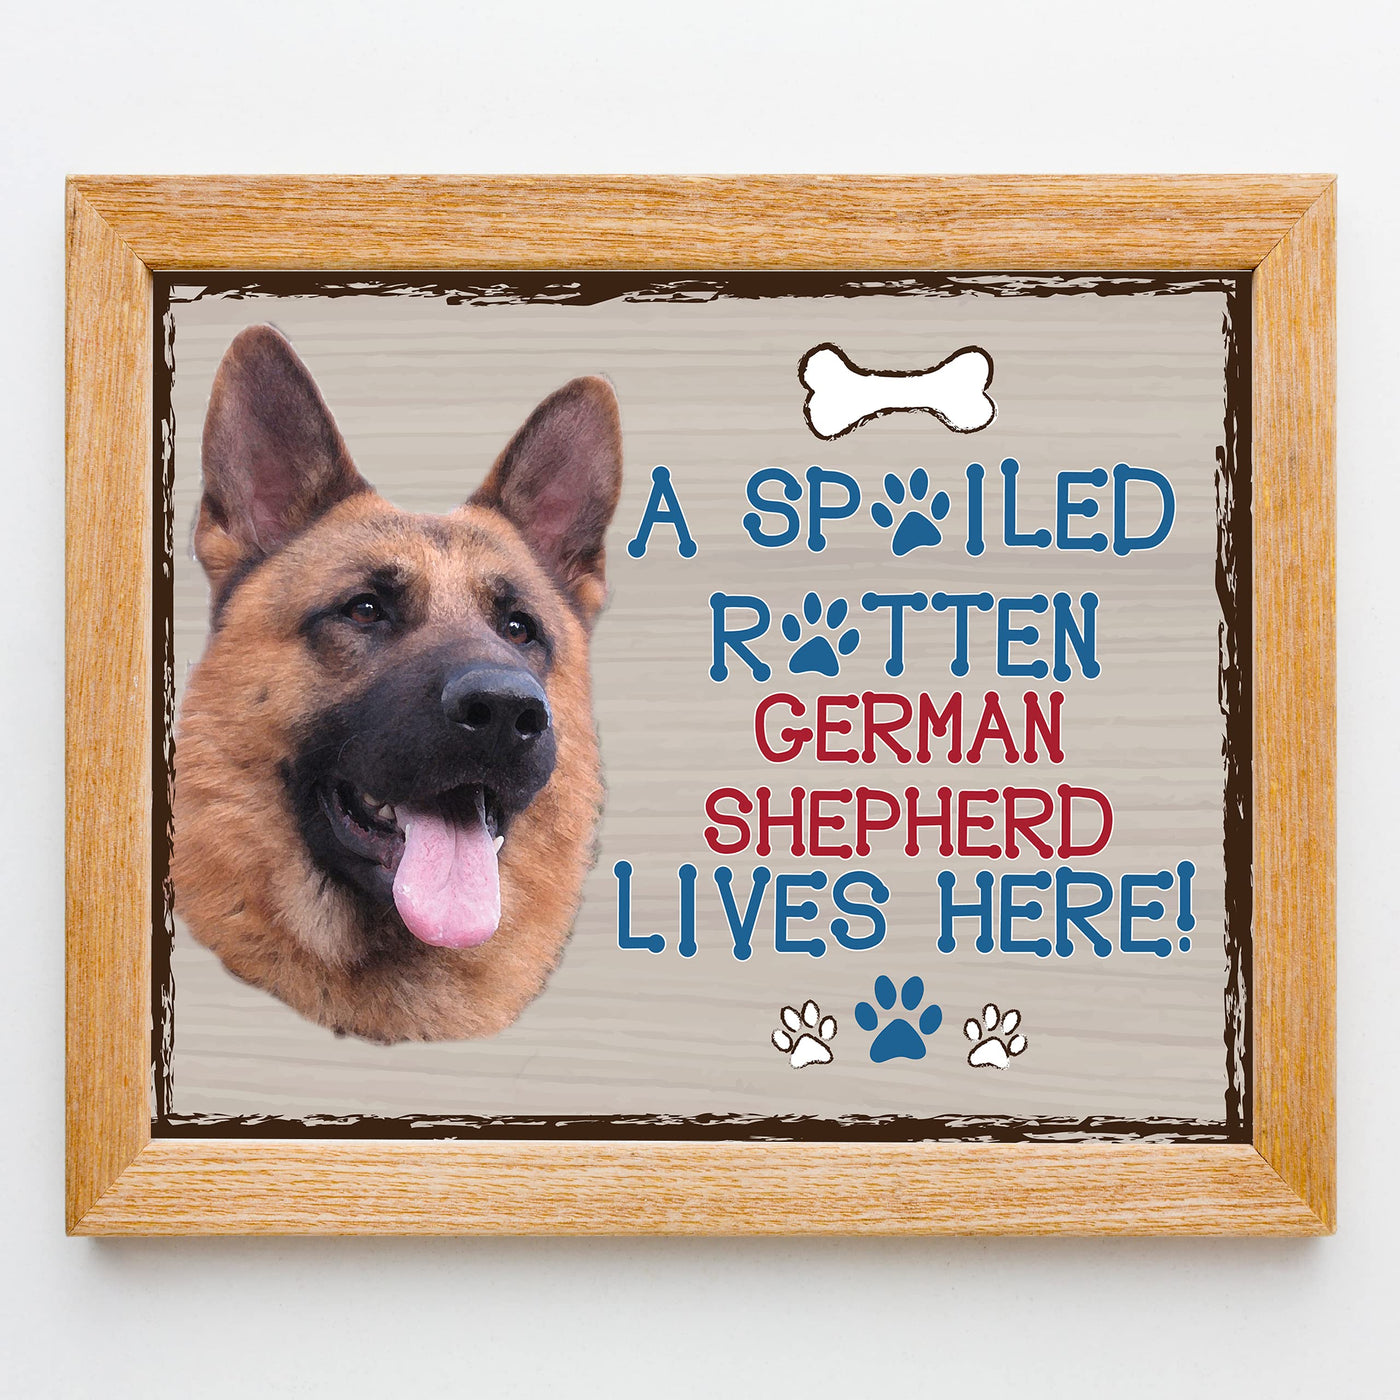 German Shepherd-Dog Poster Print-10 x 8" Wall Decor Sign-Ready To Frame."A Spoiled Rotten German Shepherd Lives Here". Perfect Pet Wall Art for Home-Kitchen-Cave-Bar-Garage. Great Gift for GS Owner.